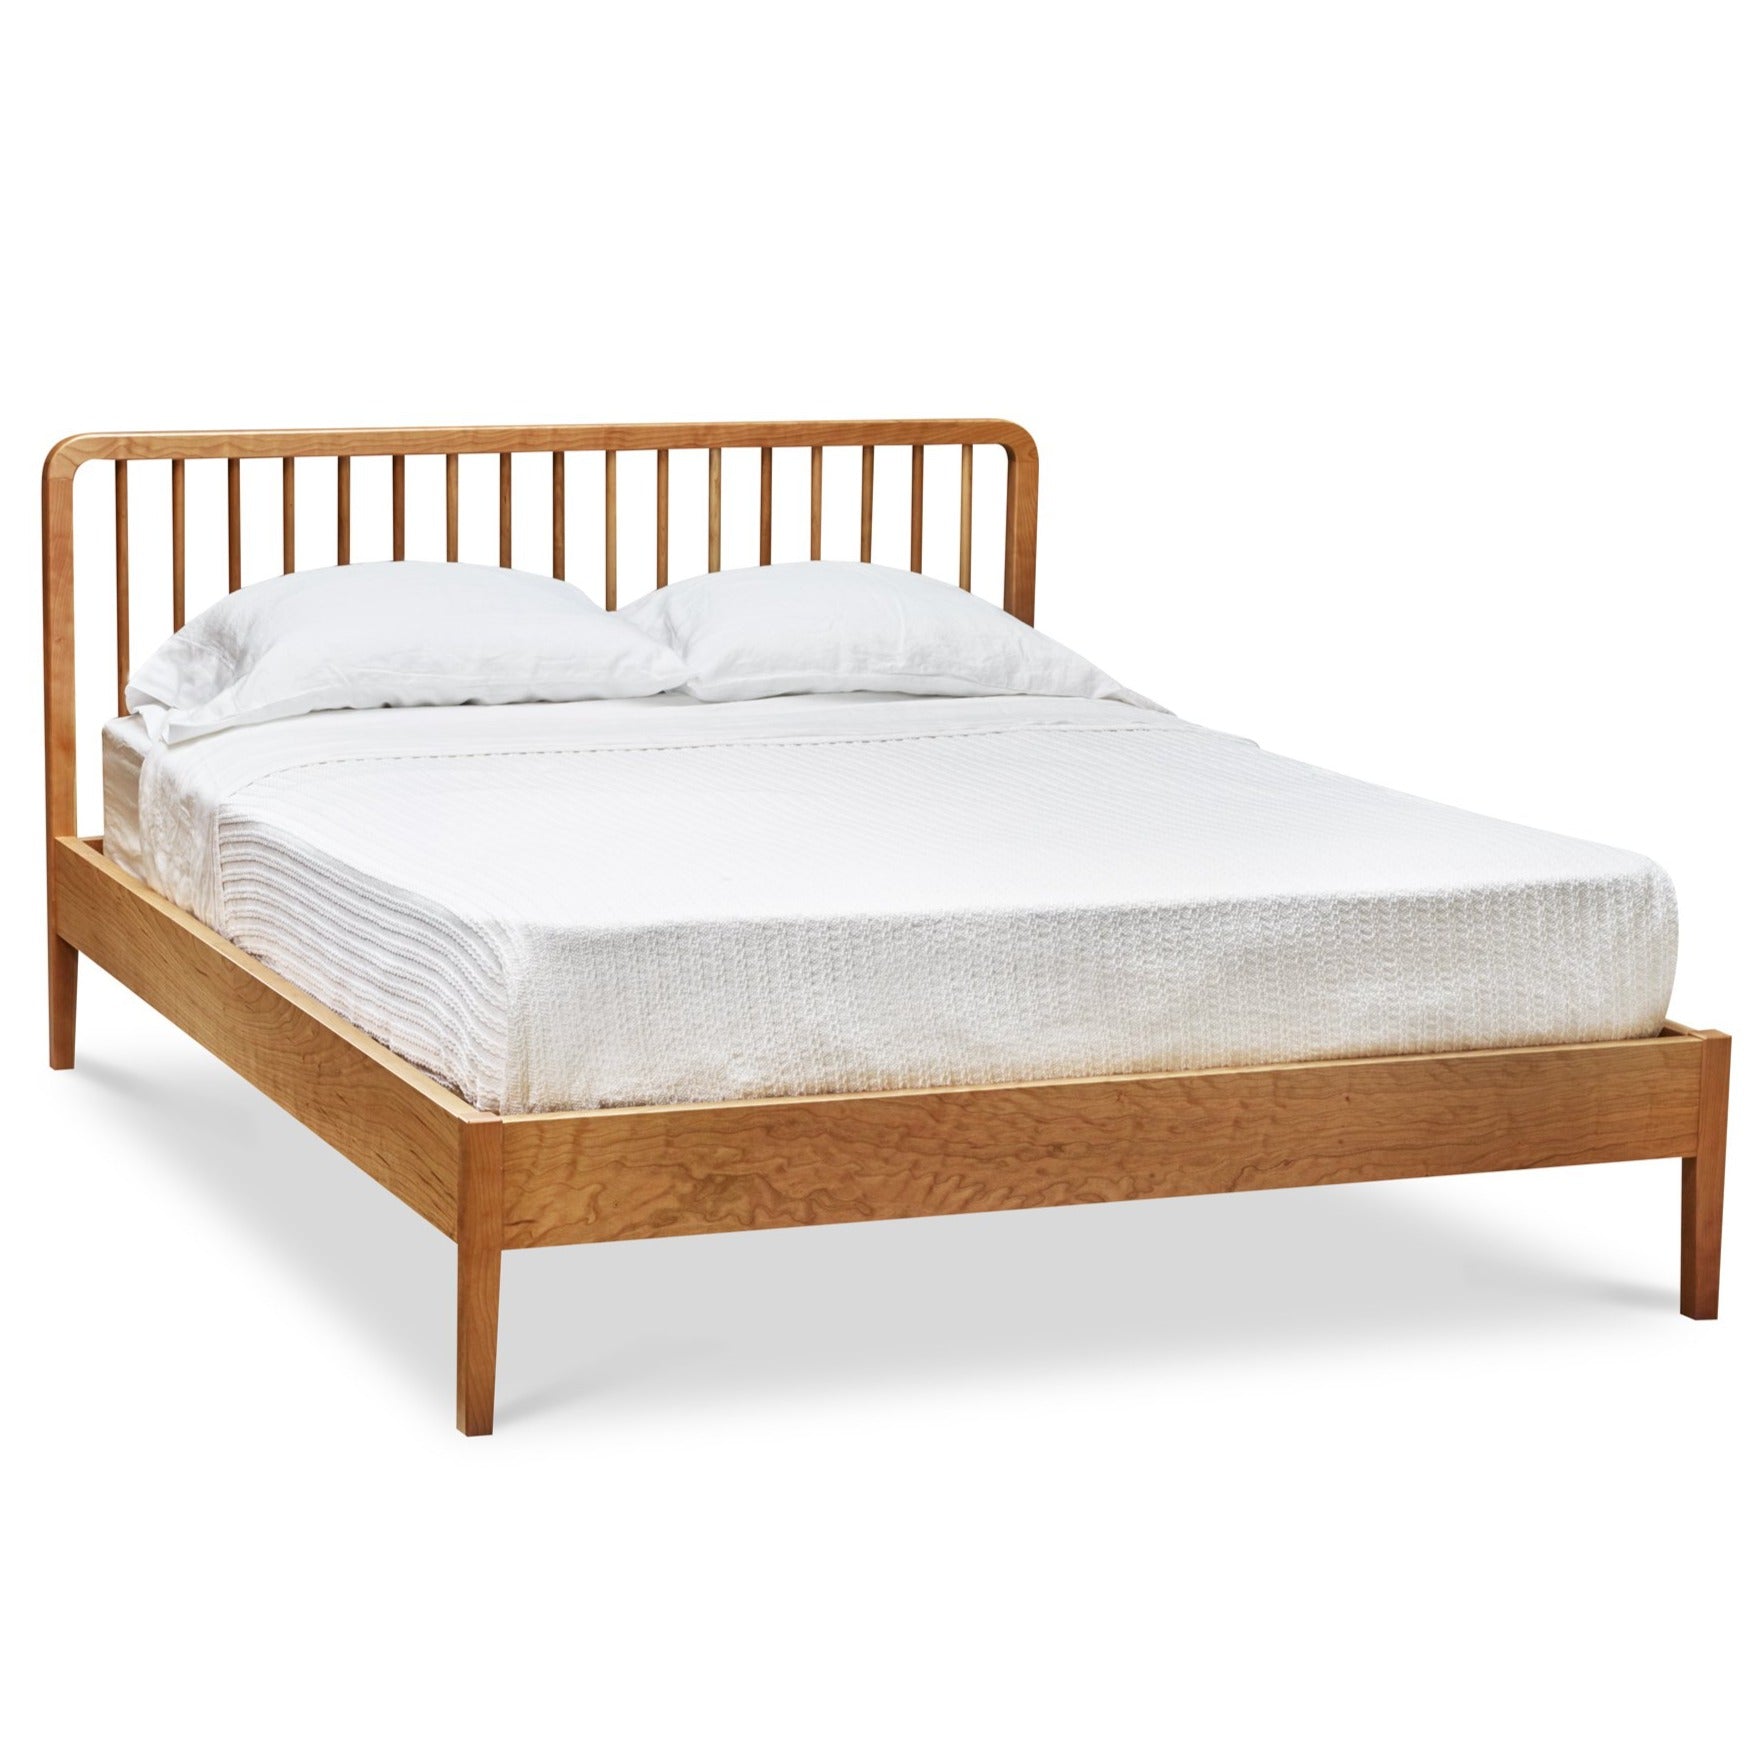 Modern Spindle bed in cherry wood from Chilton Furniture Co.